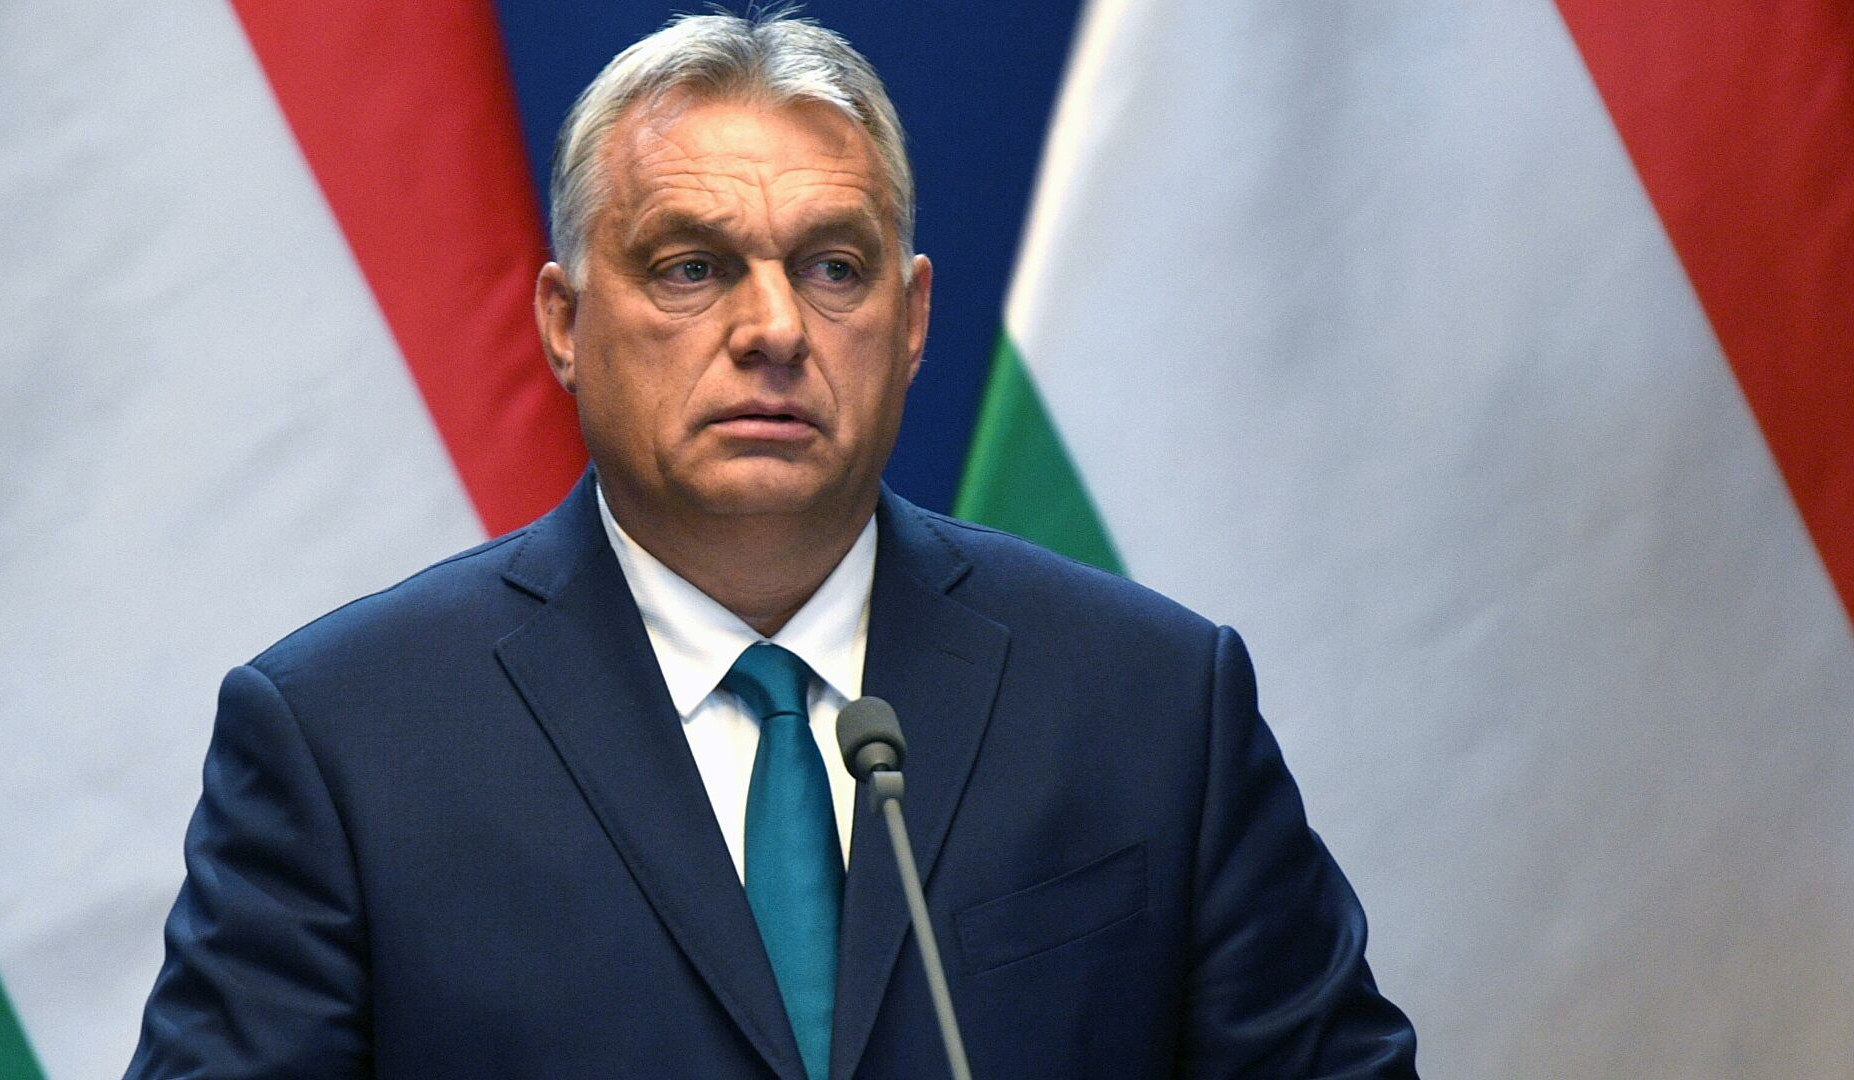 Hungary does not want to interfere in conflict in Ukraine: Orban